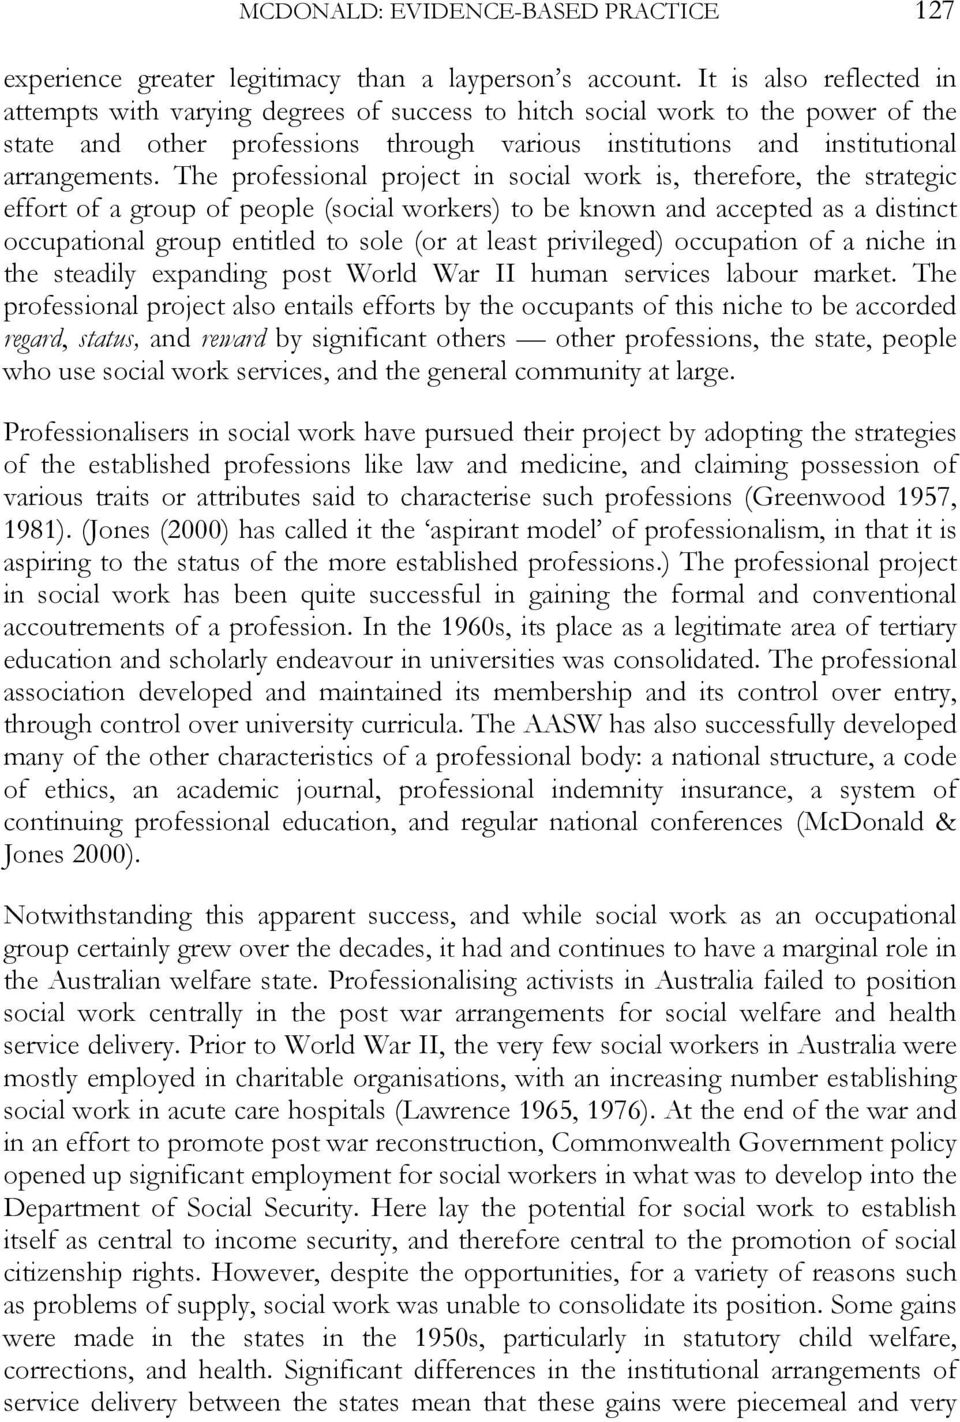 The professional project in social work is, therefore, the strategic effort of a group of people (social workers) to be known and accepted as a distinct occupational group entitled to sole (or at